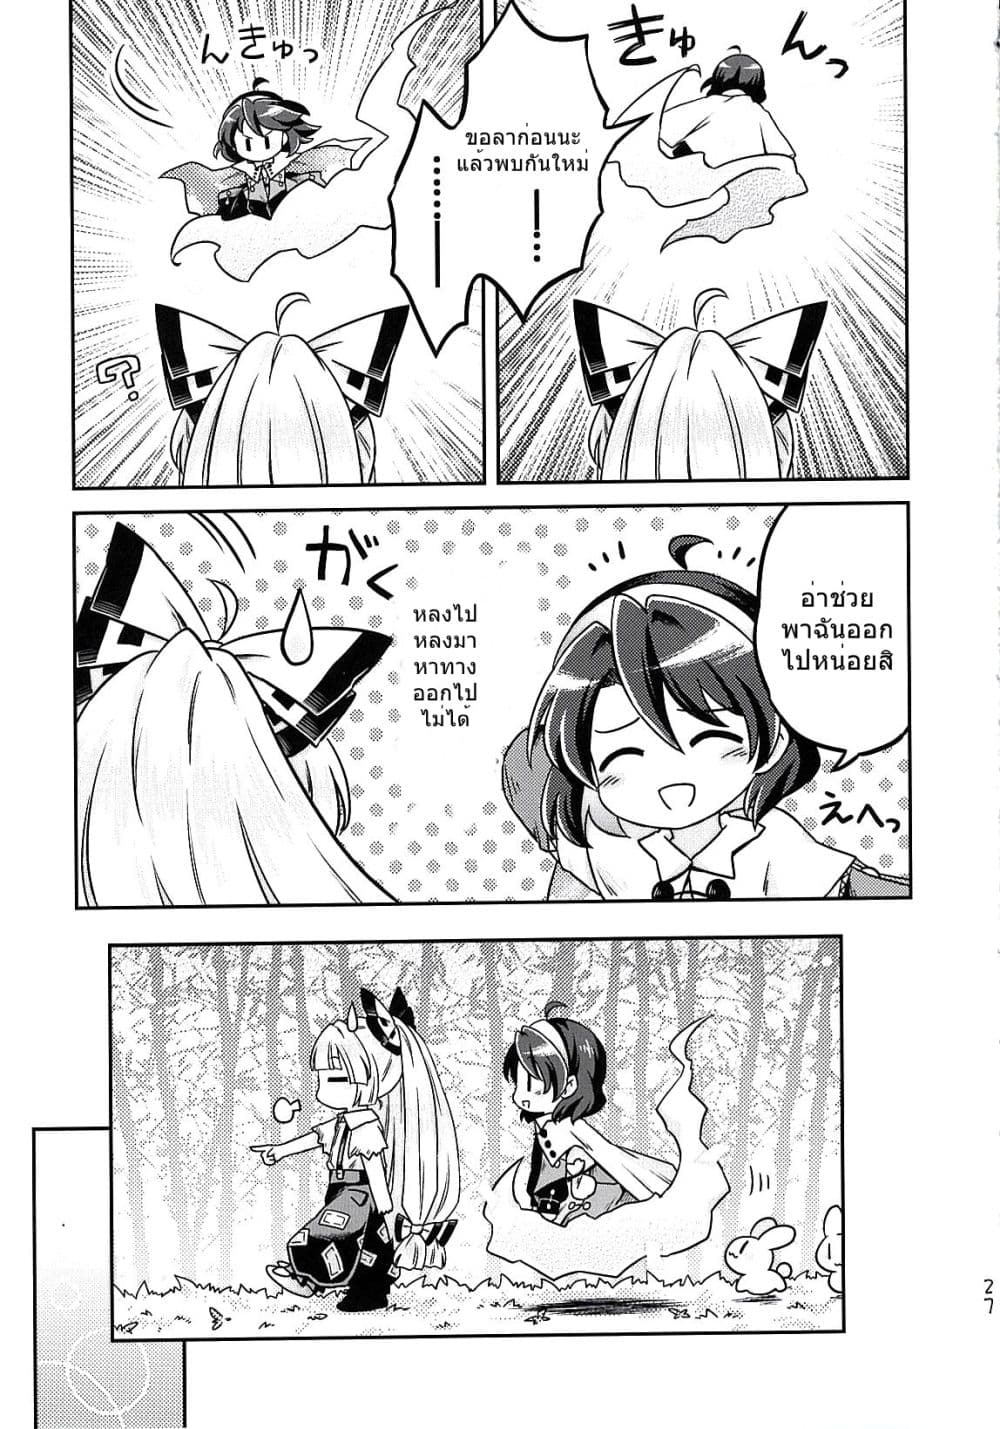 Touhou Project Chima Book By Pote ตอนที่ 2 (27)